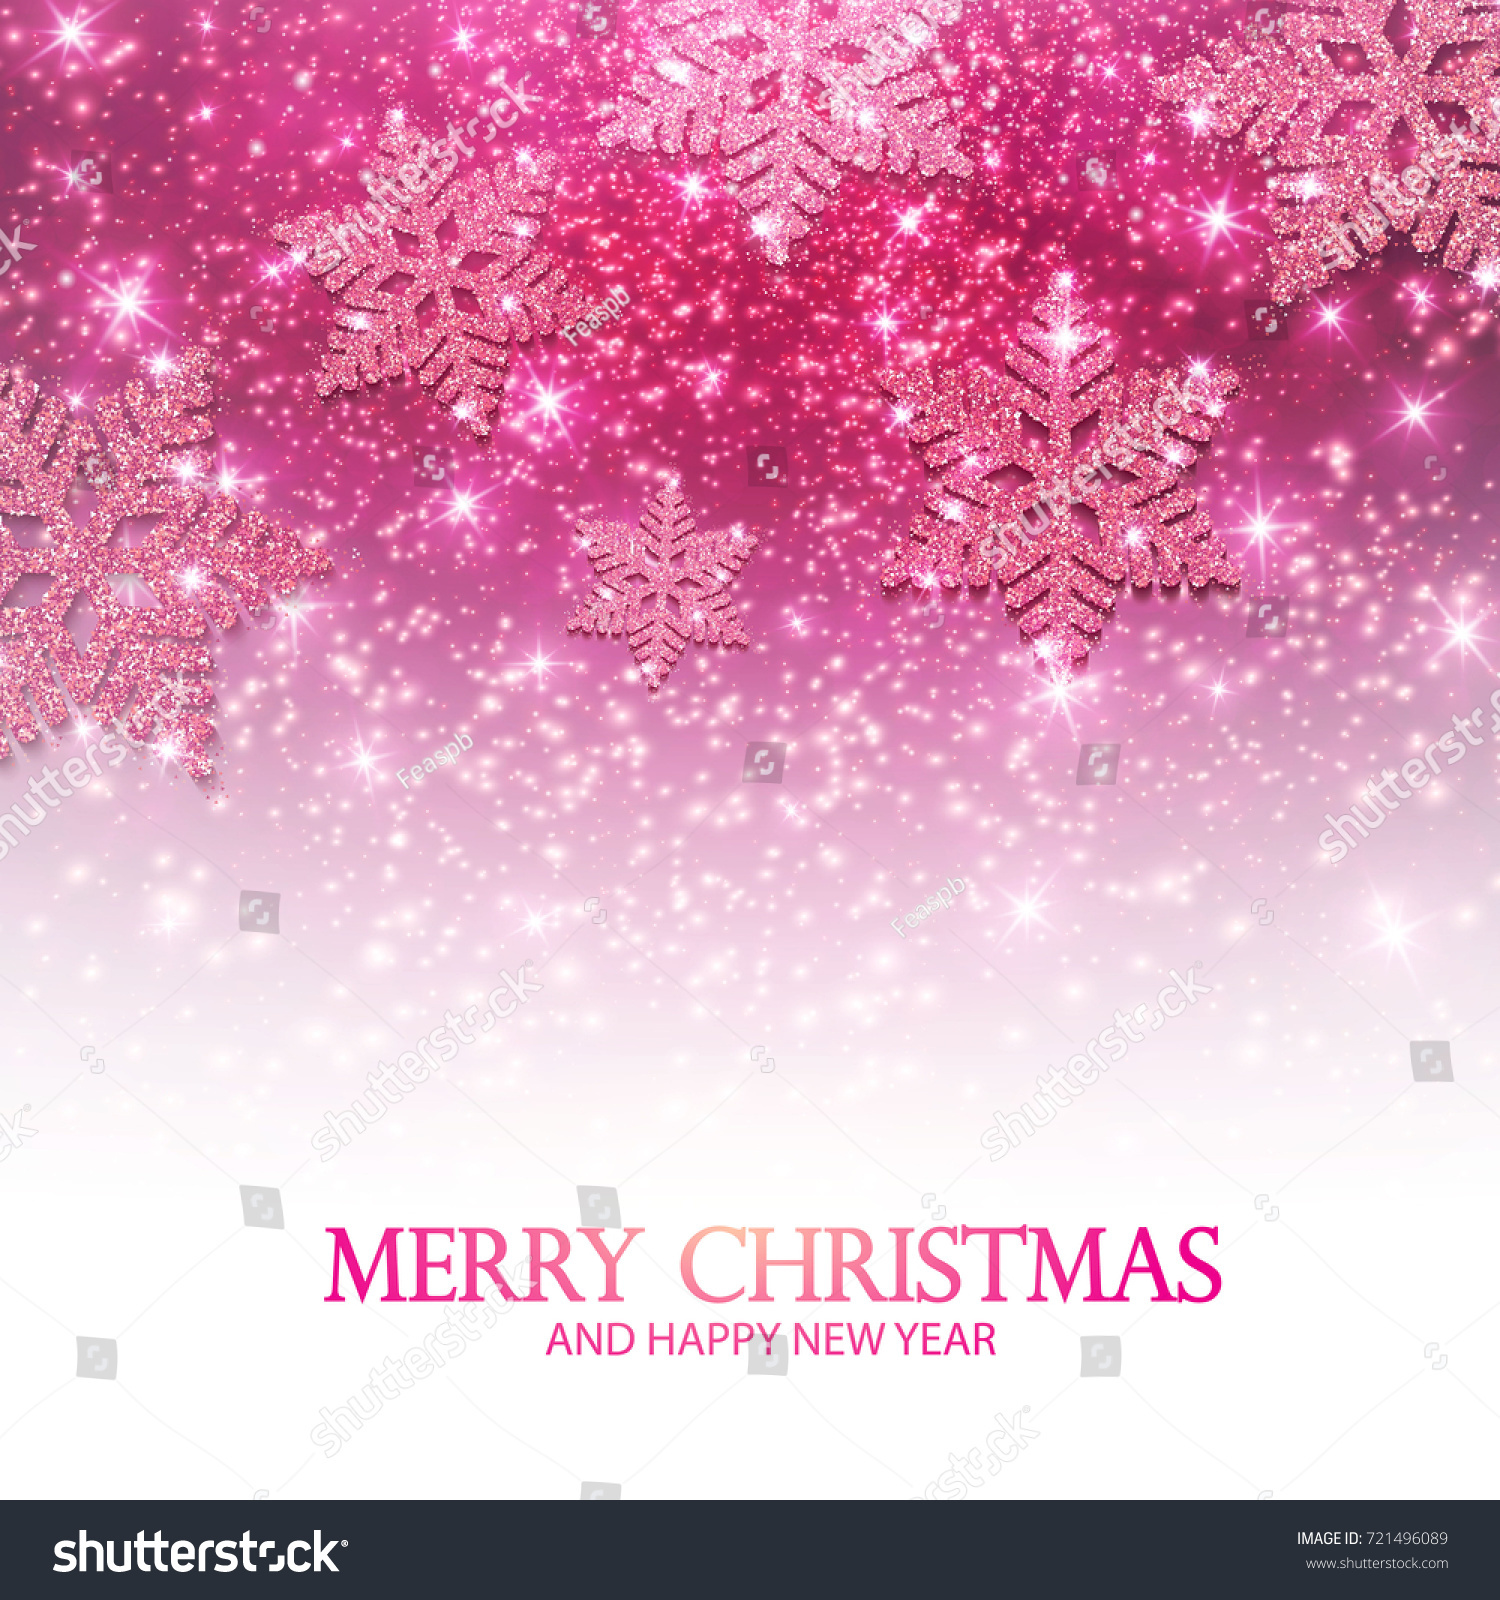 Collection 105+ Pictures Pink Merry Christmas Images Updated